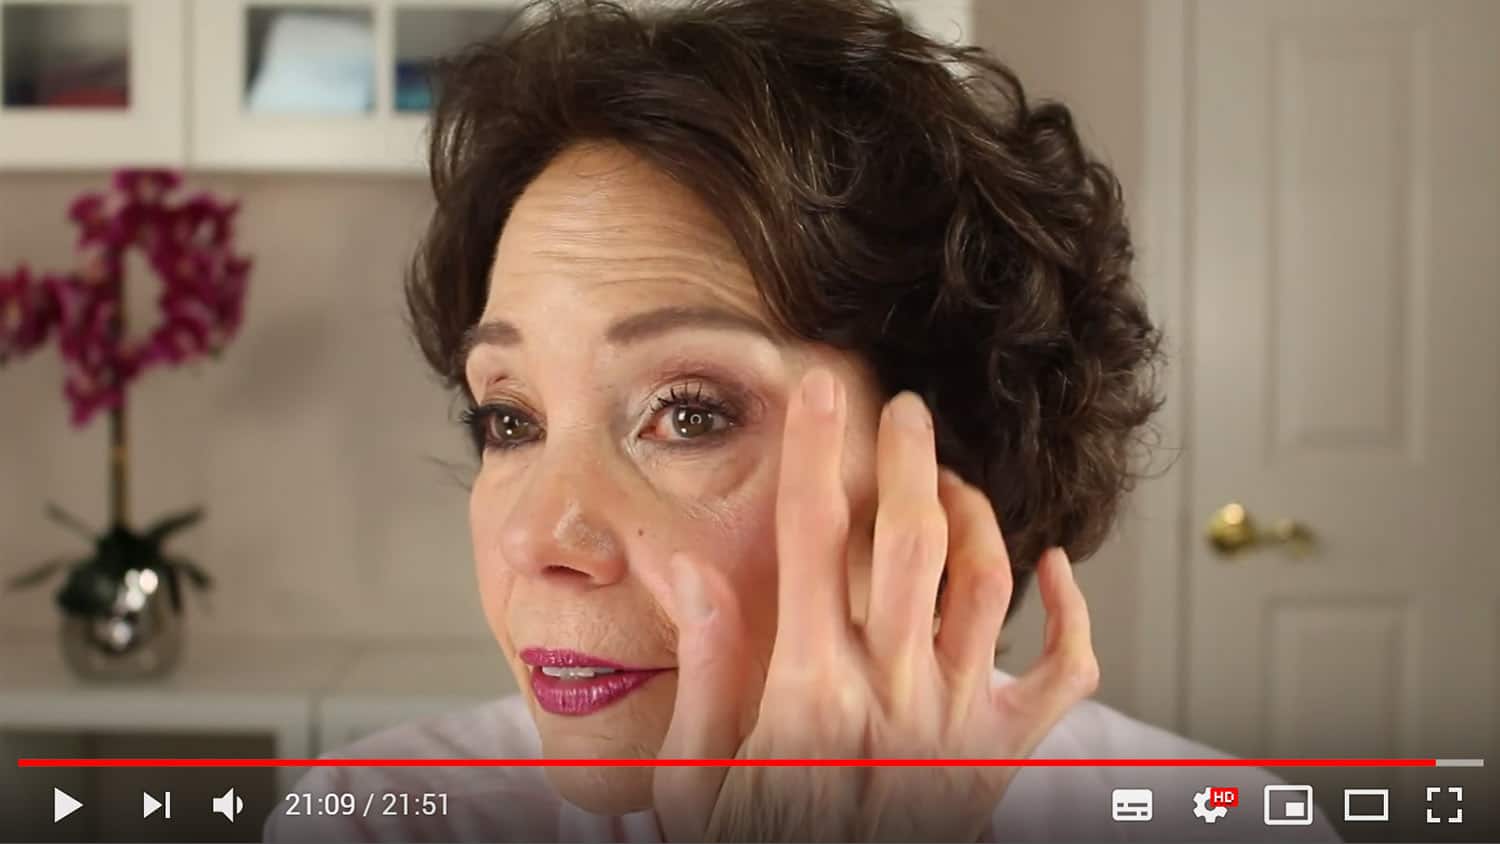 9 Pro Makeup Artist Tips for Women 50+ with Hooded Eyes (Video)